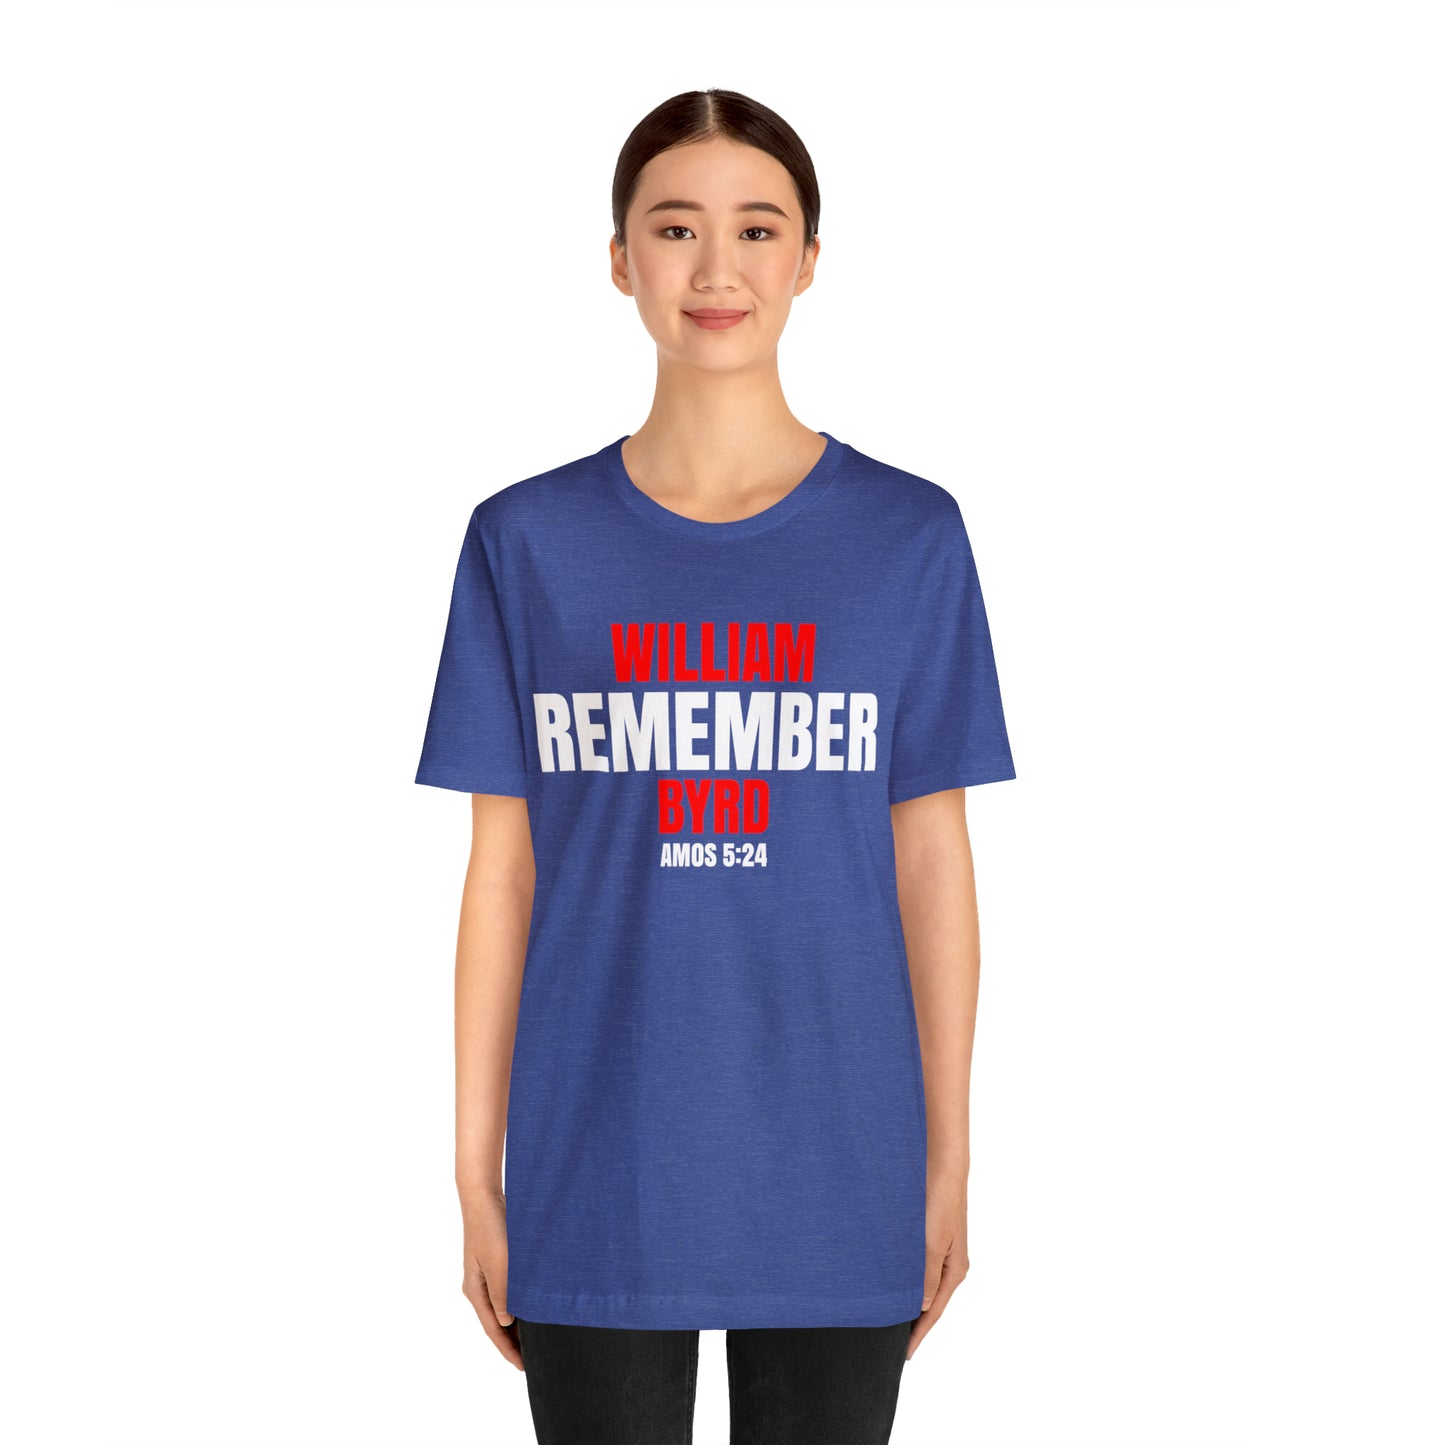 The Remember Series-William Byrd-Unisex Jersey Short Sleeve Tee